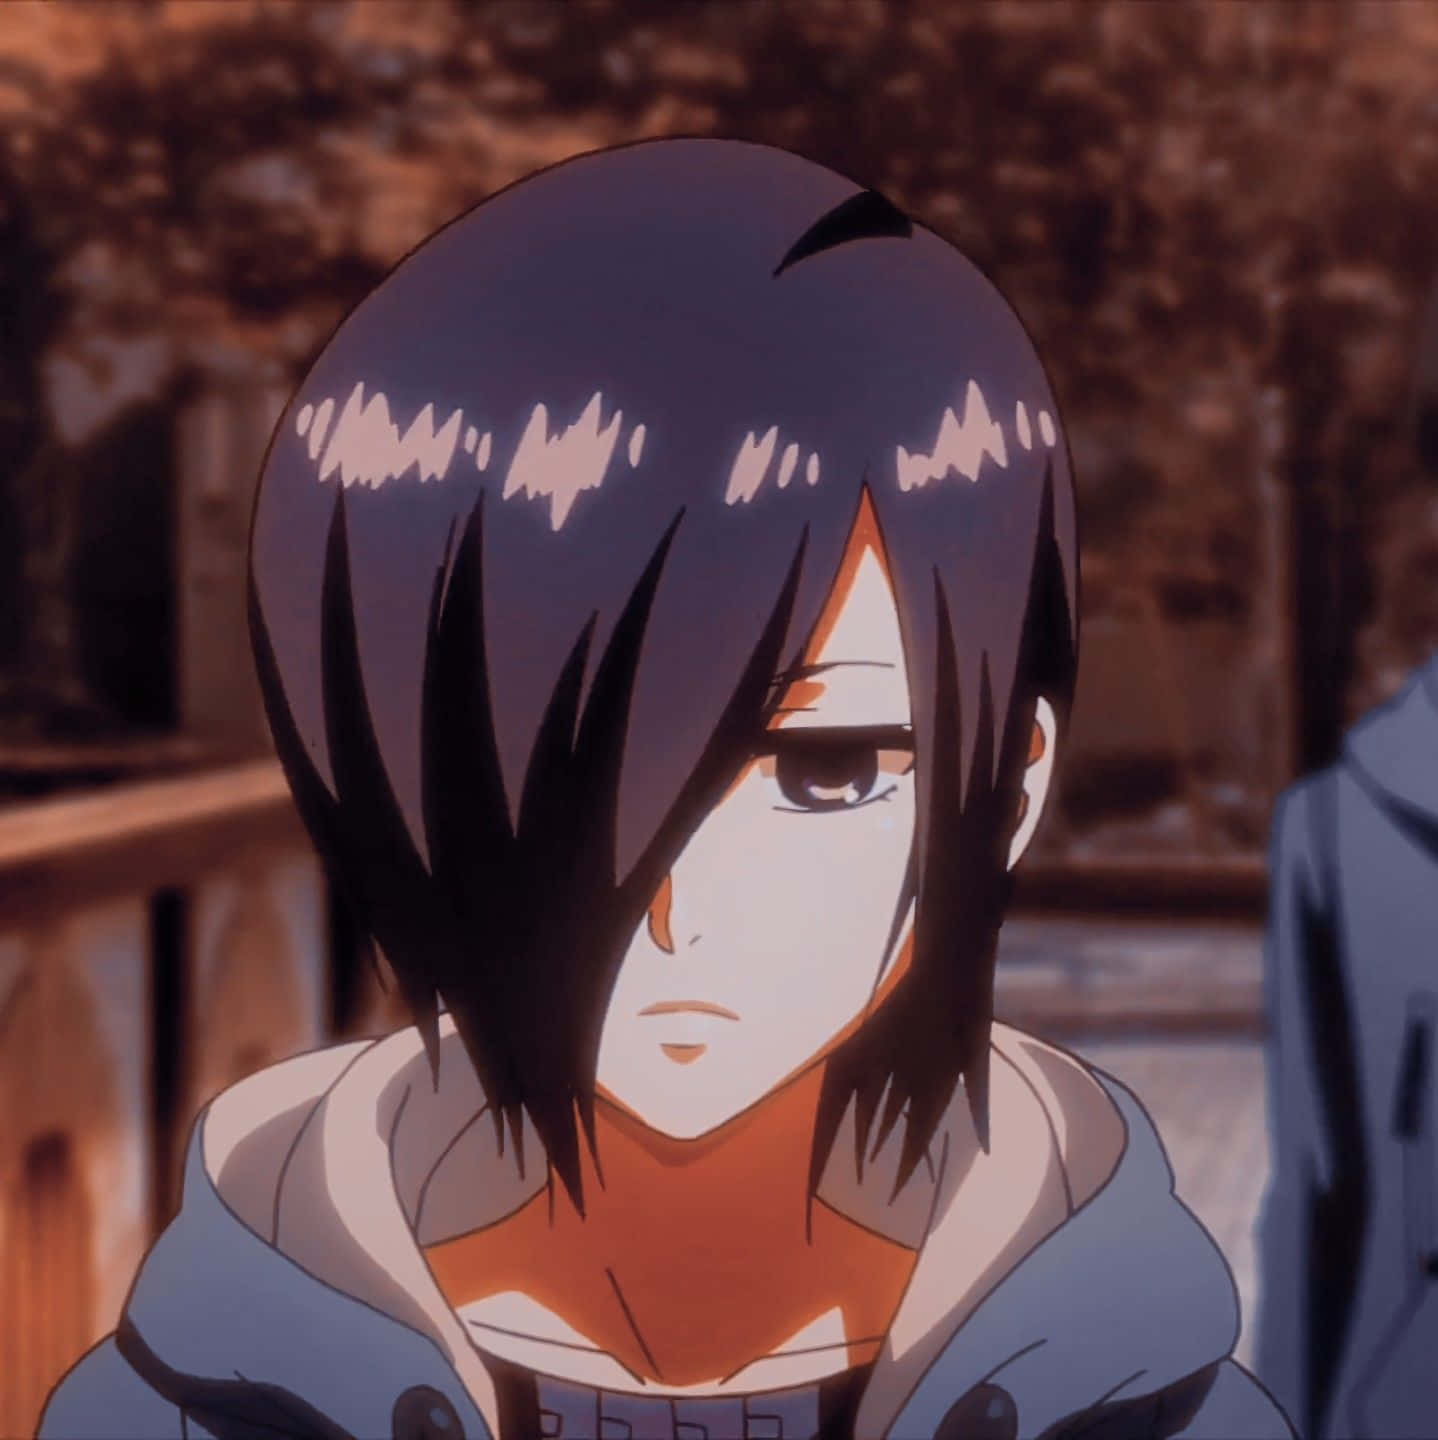 Beauty and strength come together in Touka Kirishima" Wallpaper